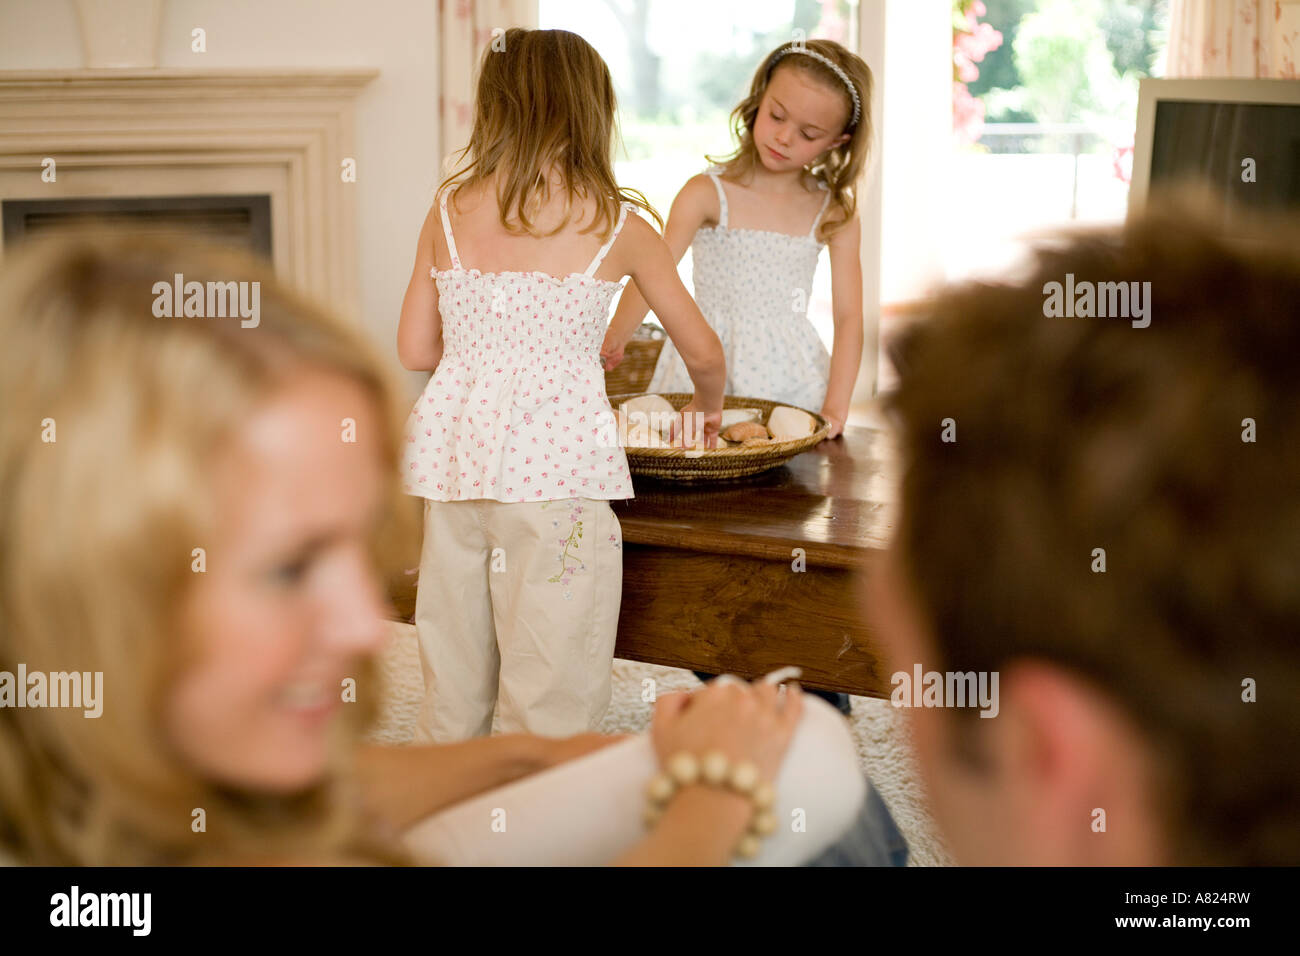 A family relaxing at home Stock Photo